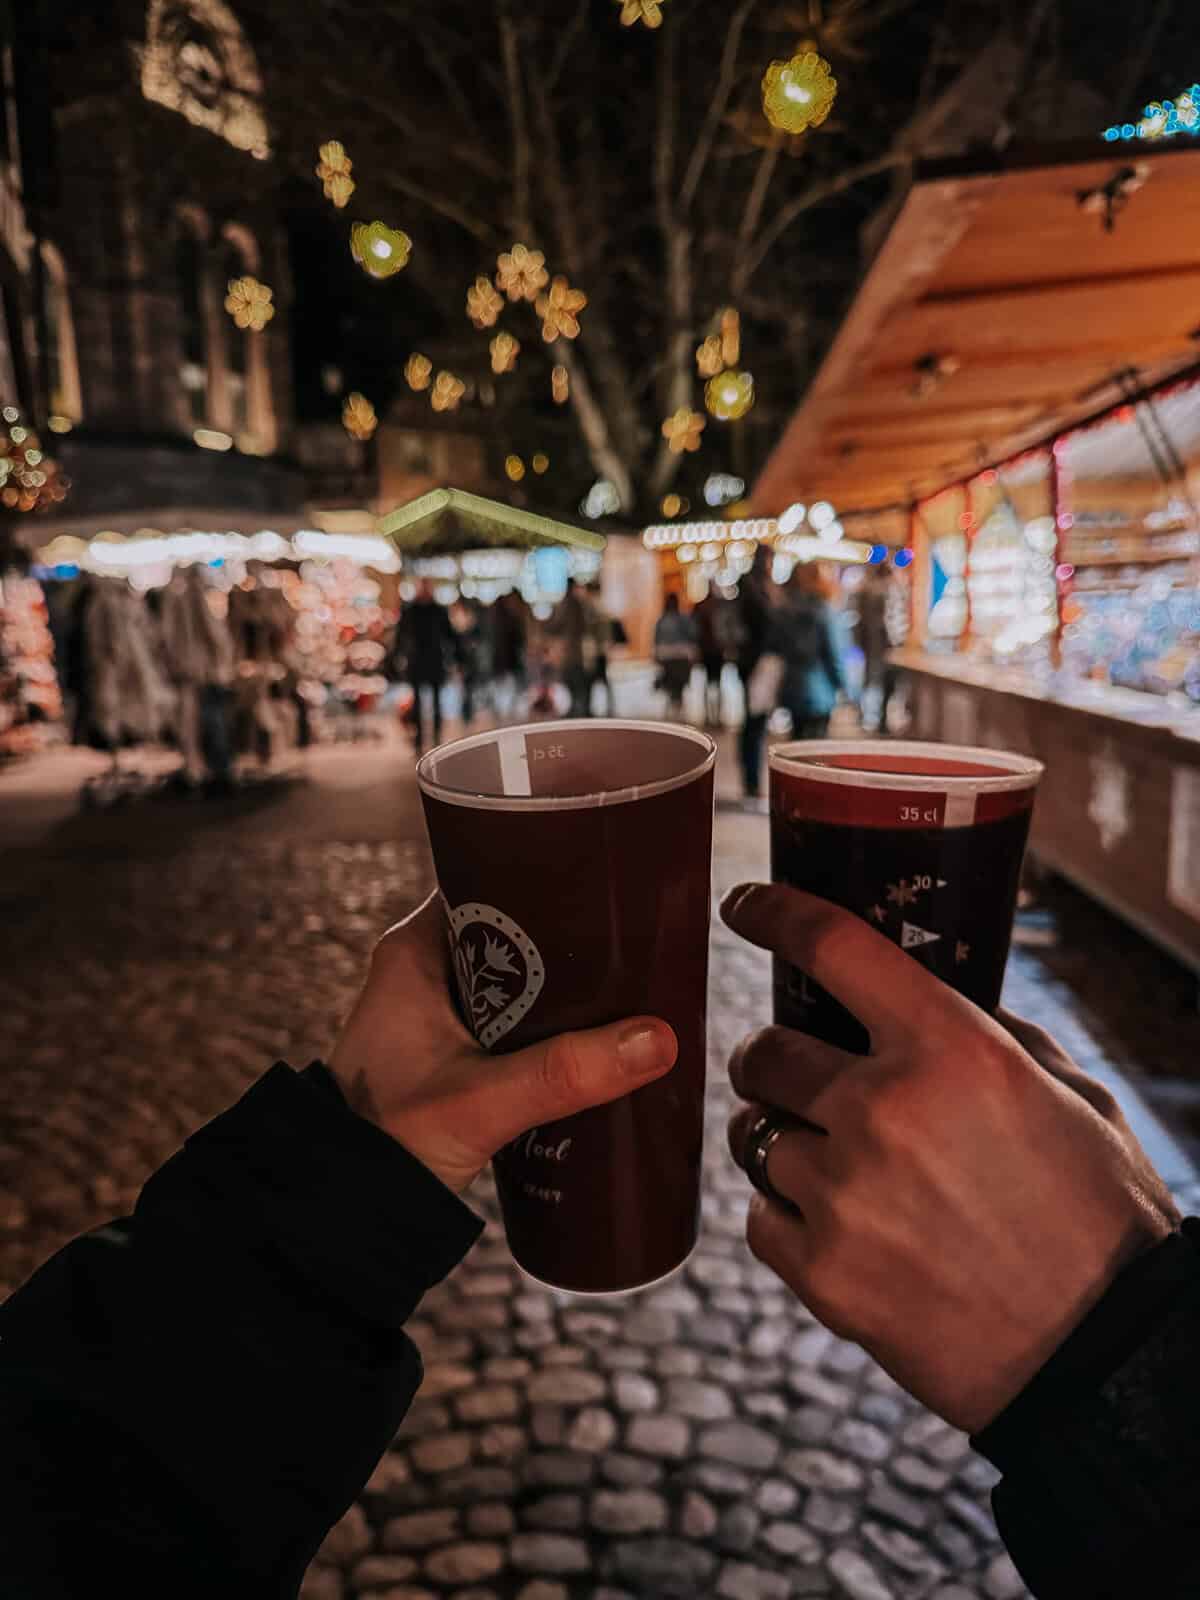 Two hands holding cups of mulled wine at a bustling Christmas market at night, with glowing festive lights and market stalls in the background.